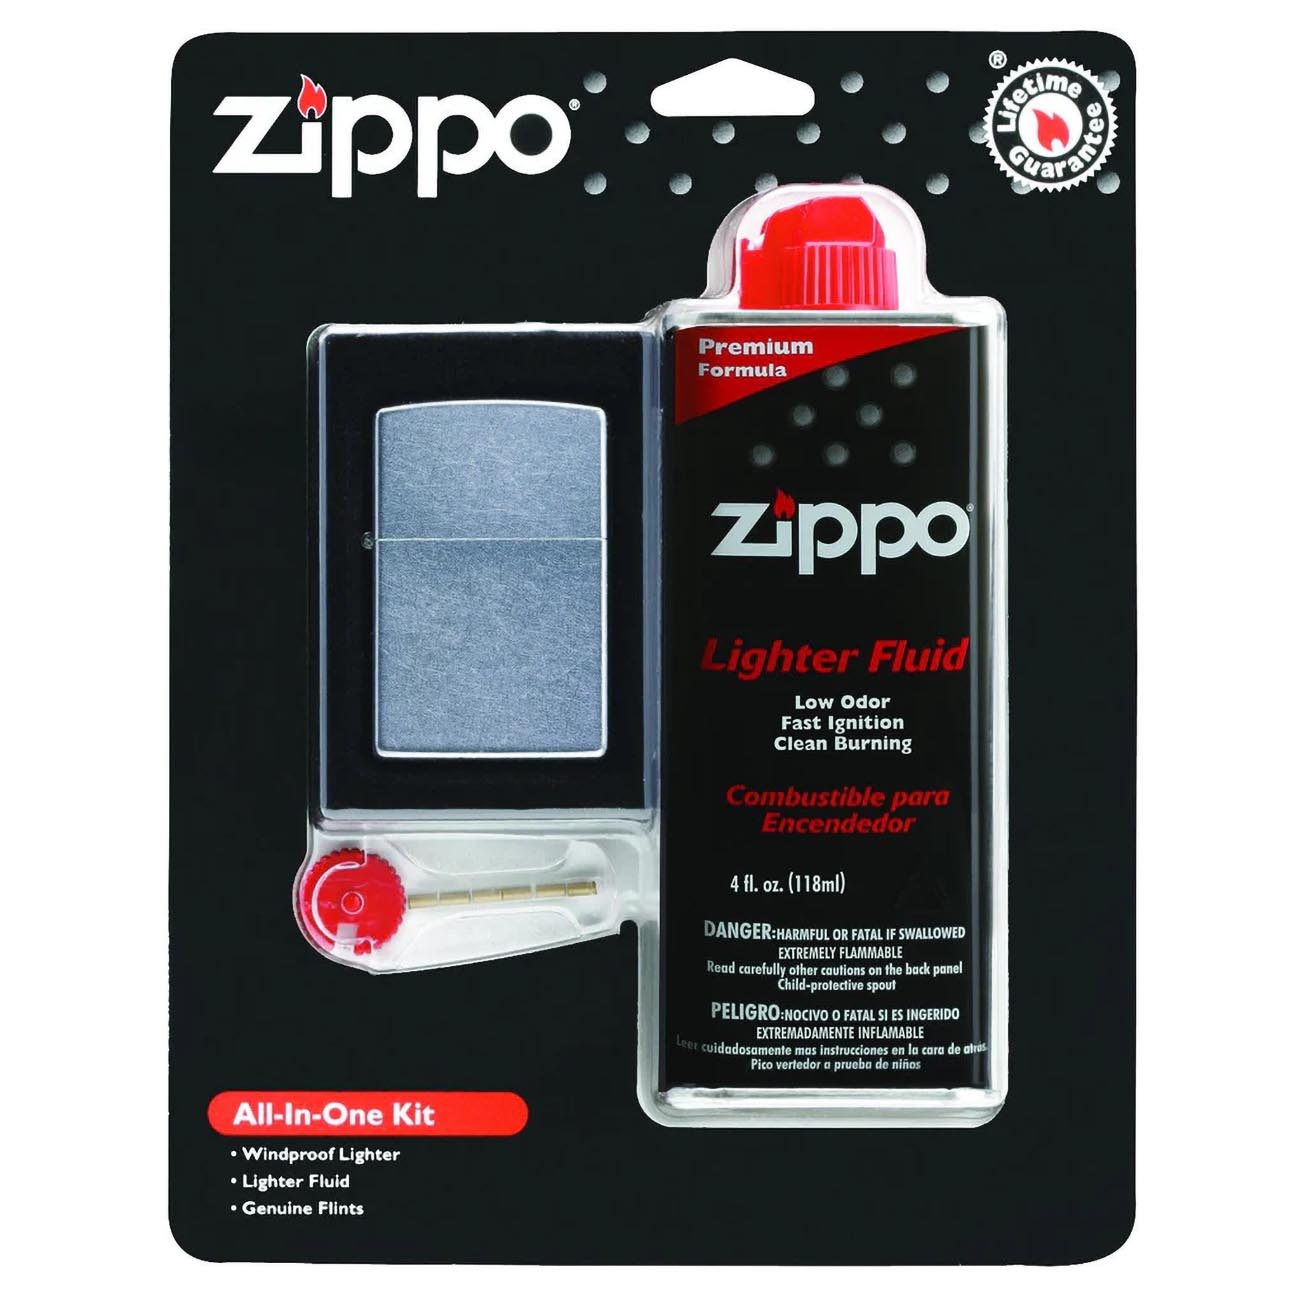 Zippo All-in-One Gift Set with Windproof Lighter (Silver)